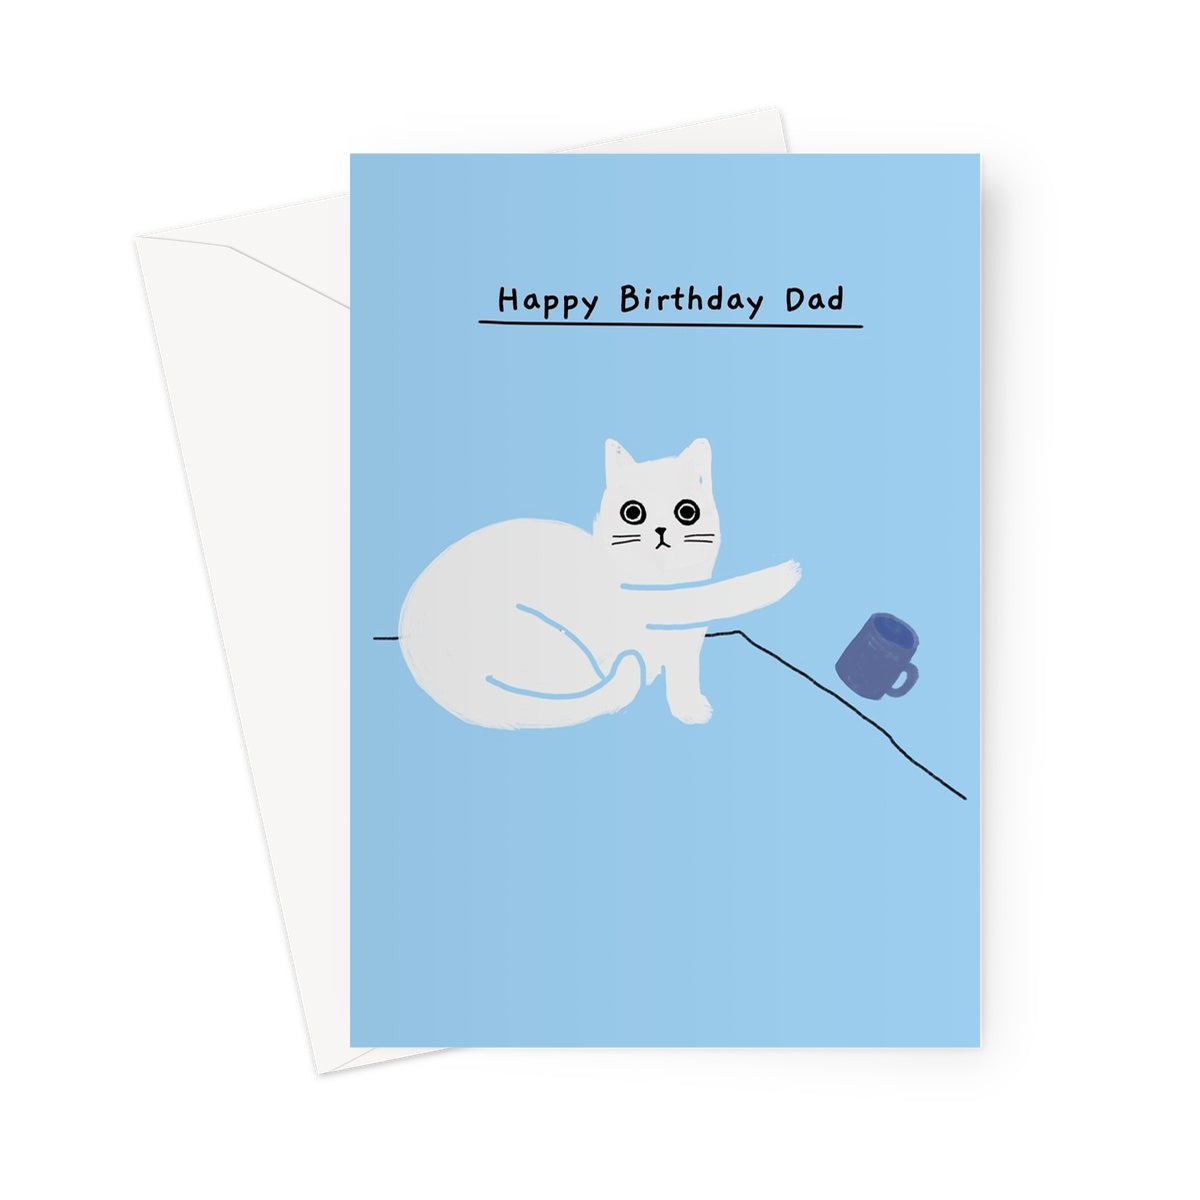 Ken the cat funny birthday card for Dad in blue - mug